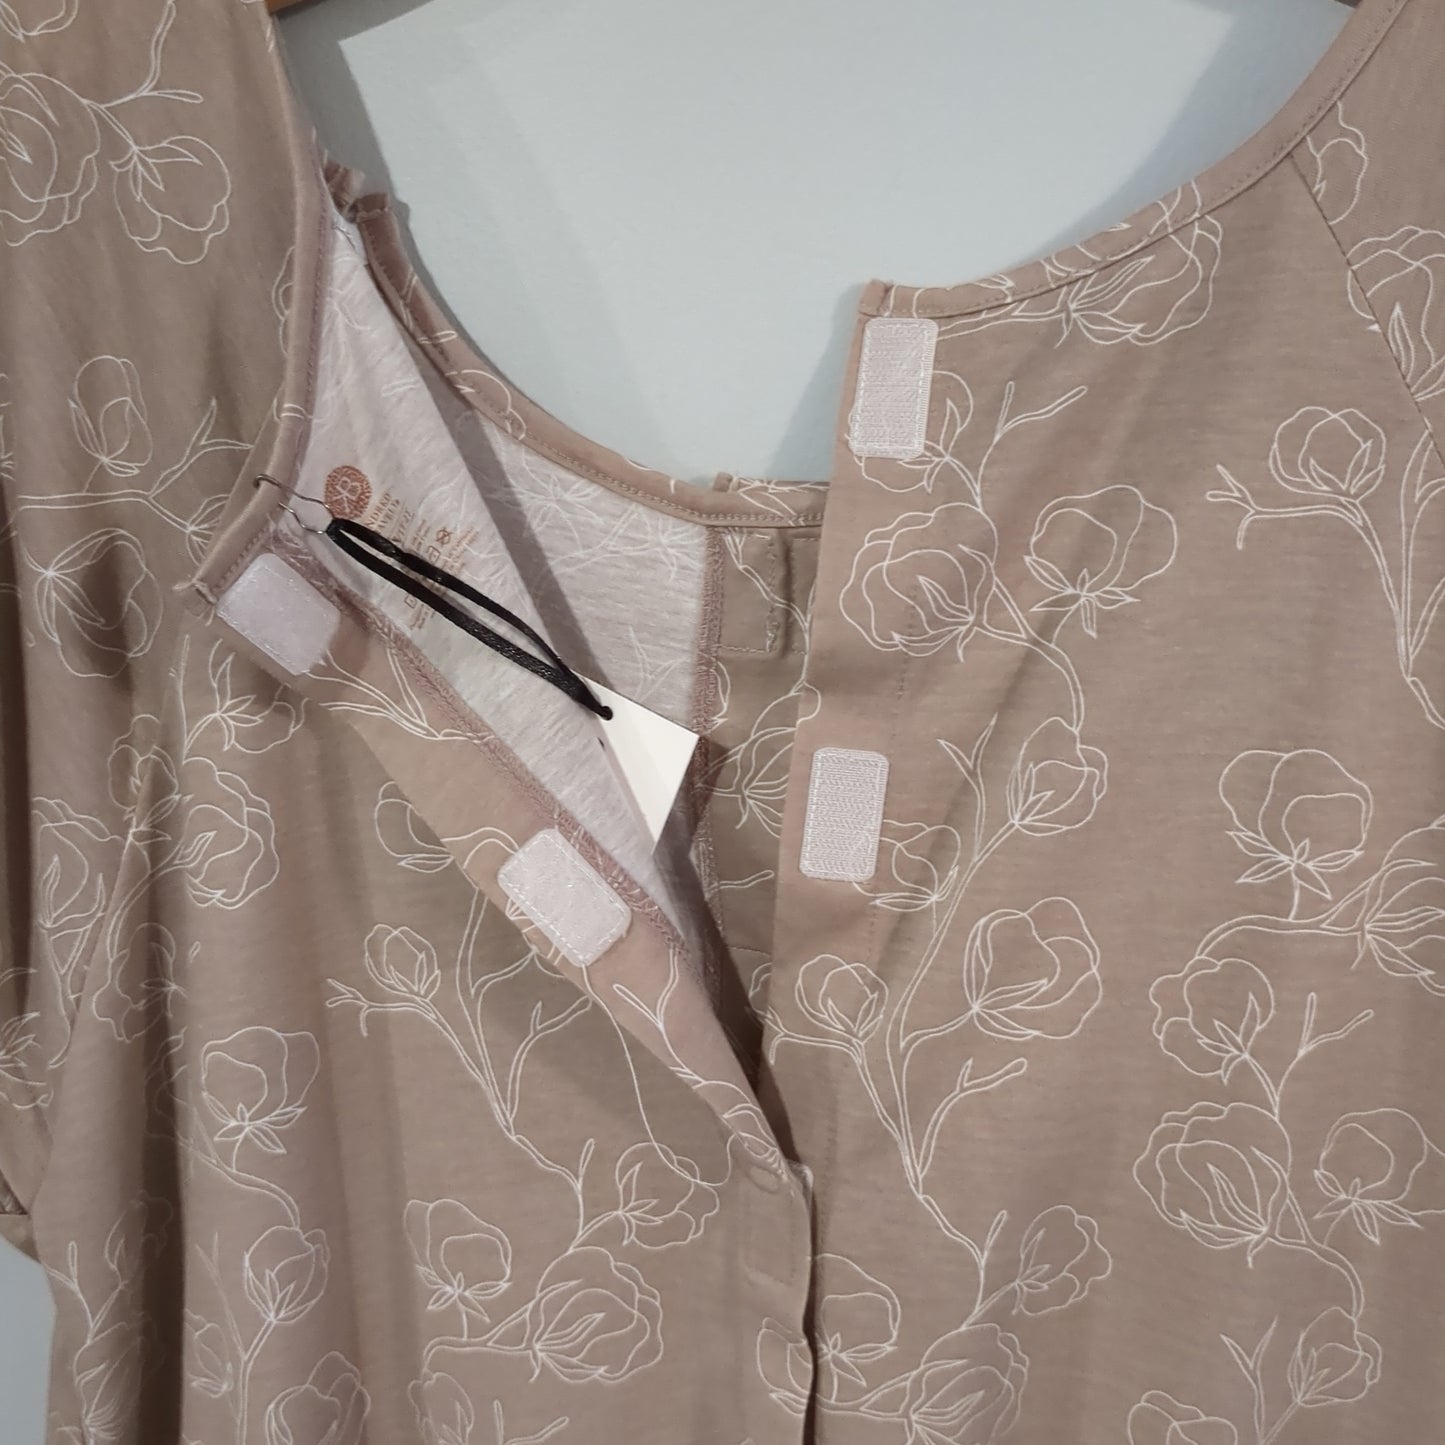 Snap & Velcro closure sleepwear & labor/birth gown, Taupe -NF